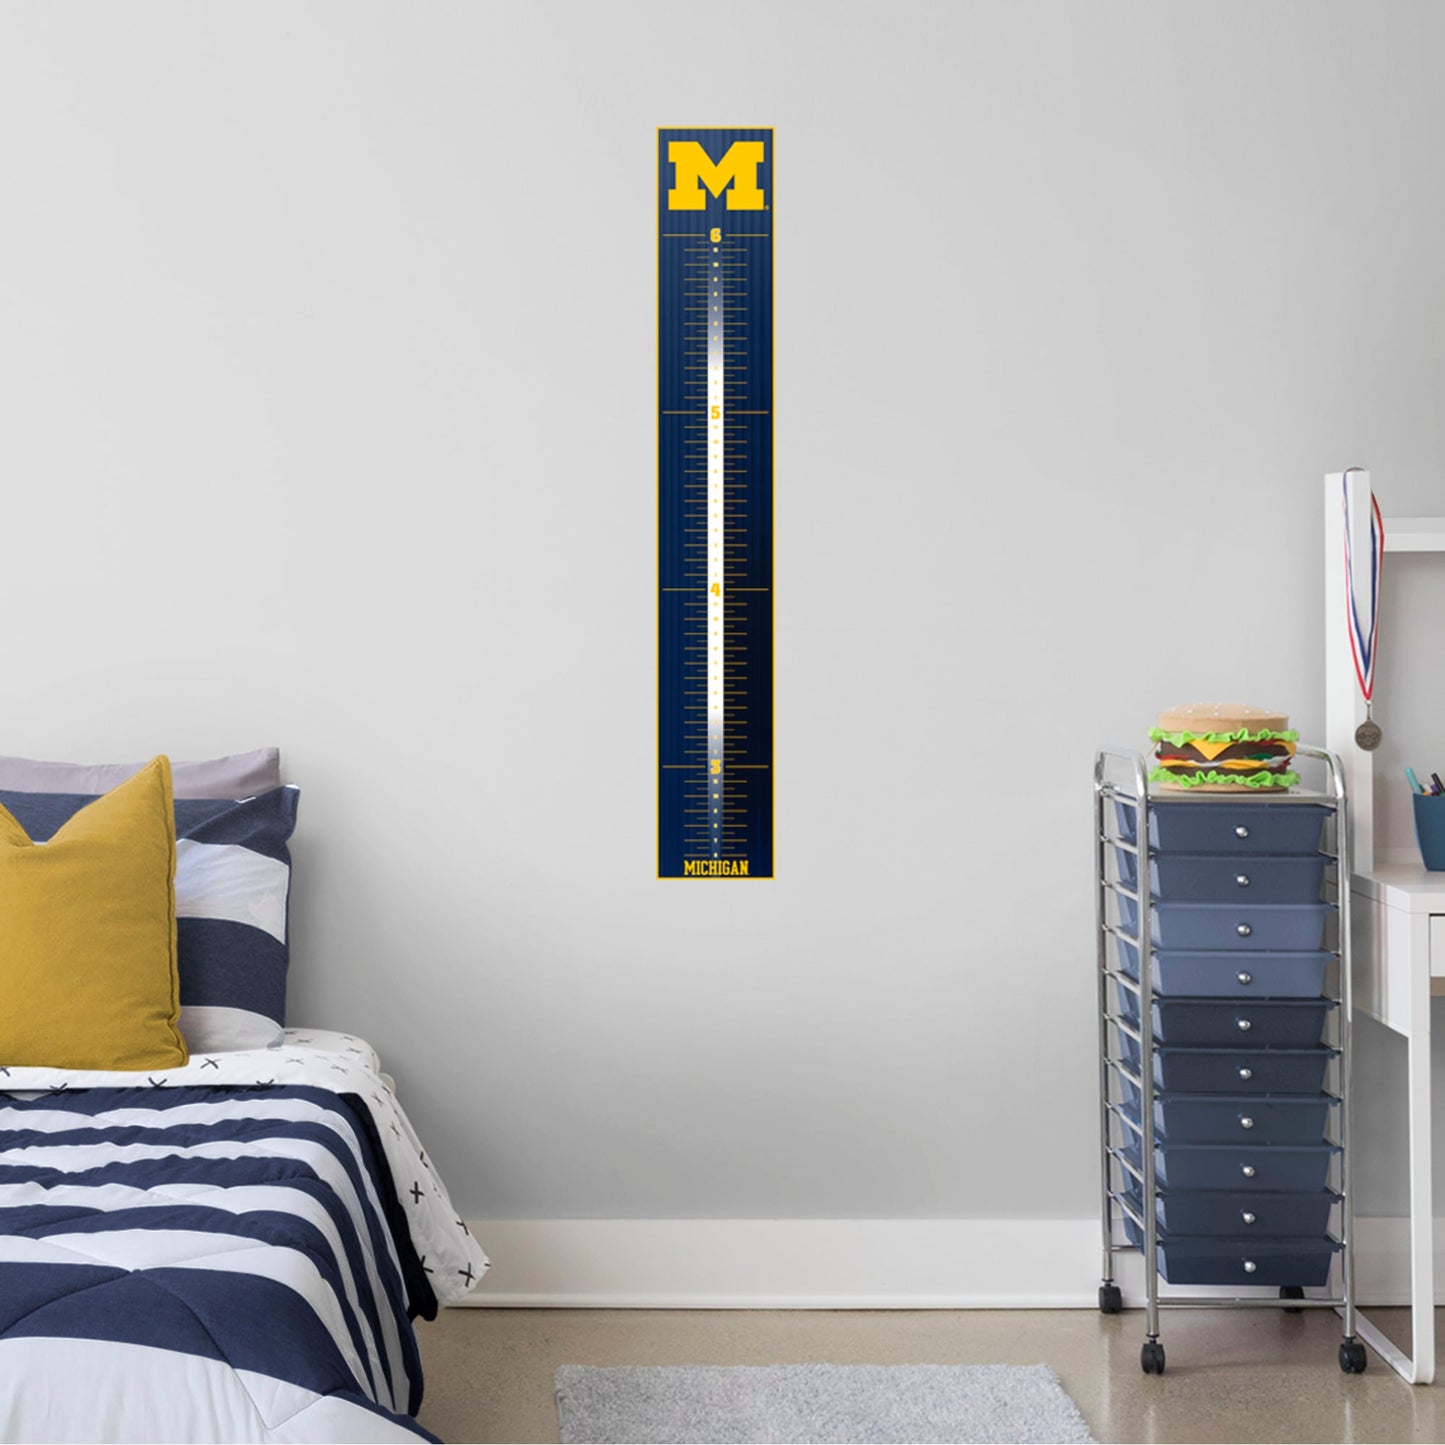 Michigan Wolverines: Logo Growth Chart - Officially Licensed Removable Wall Decal